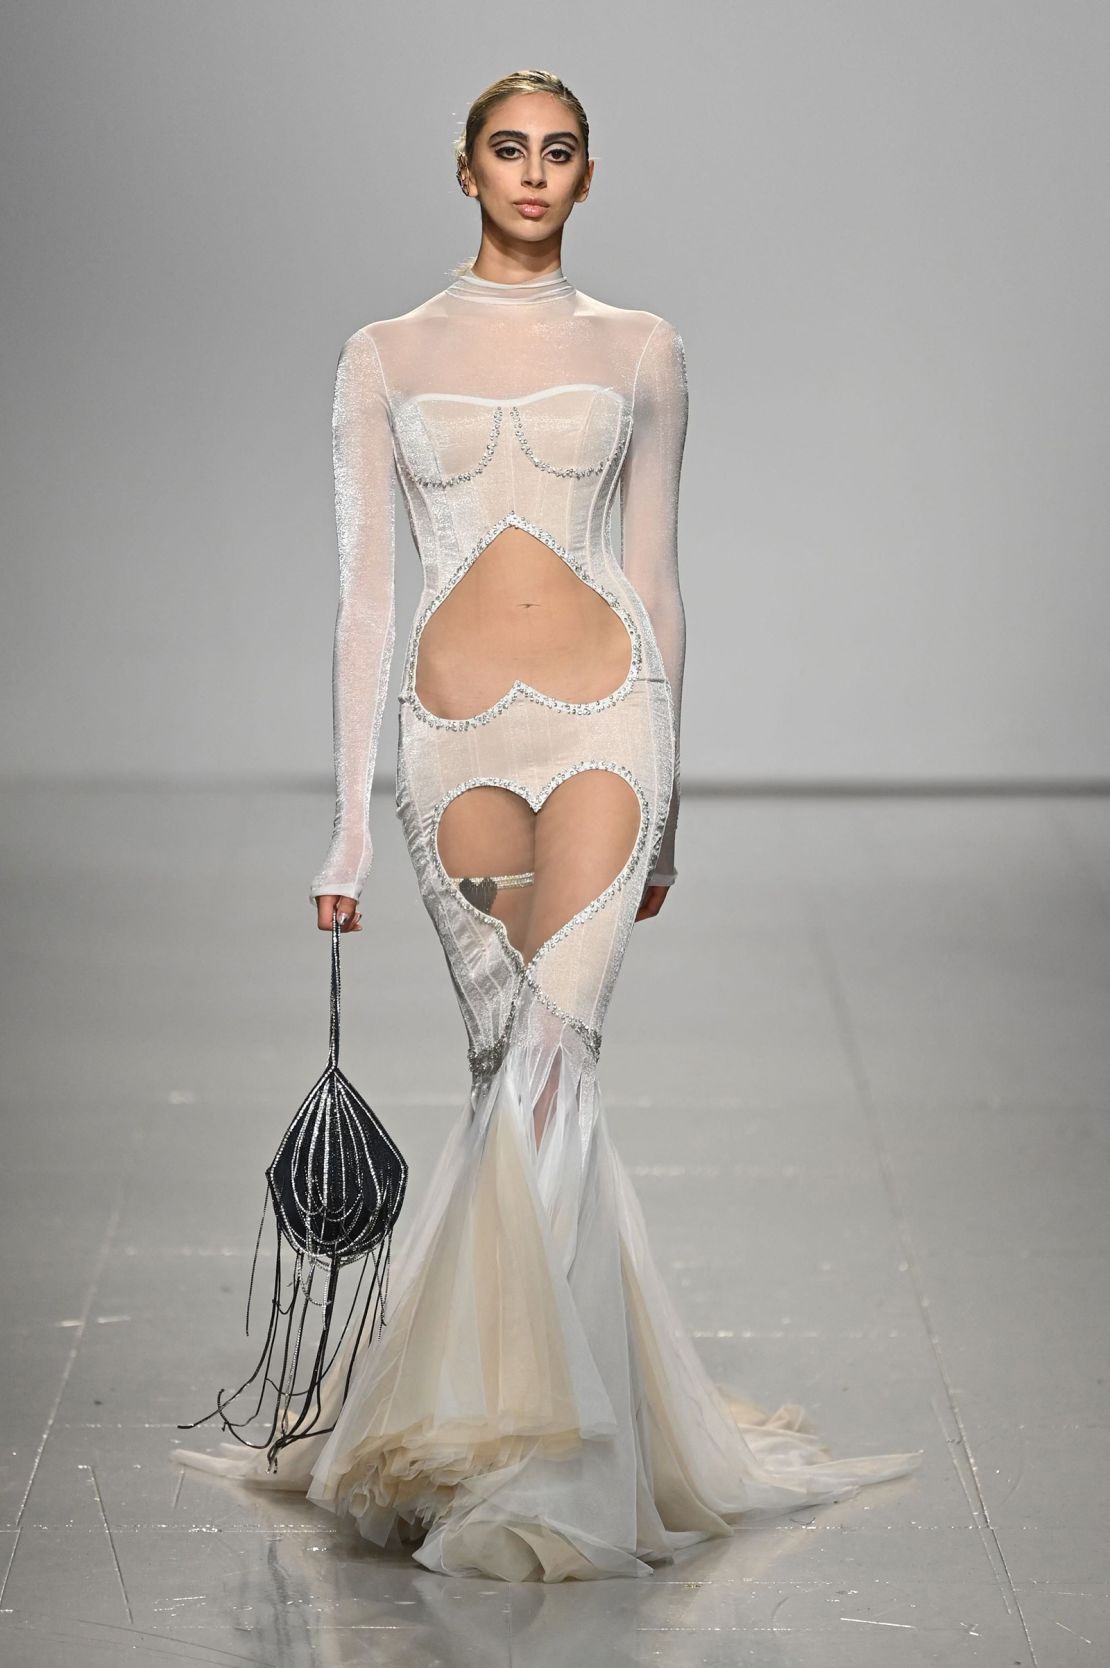 A look by Frolov presented as part of a special Ukrainian Fashion Week show staged at the end of the London schedule.